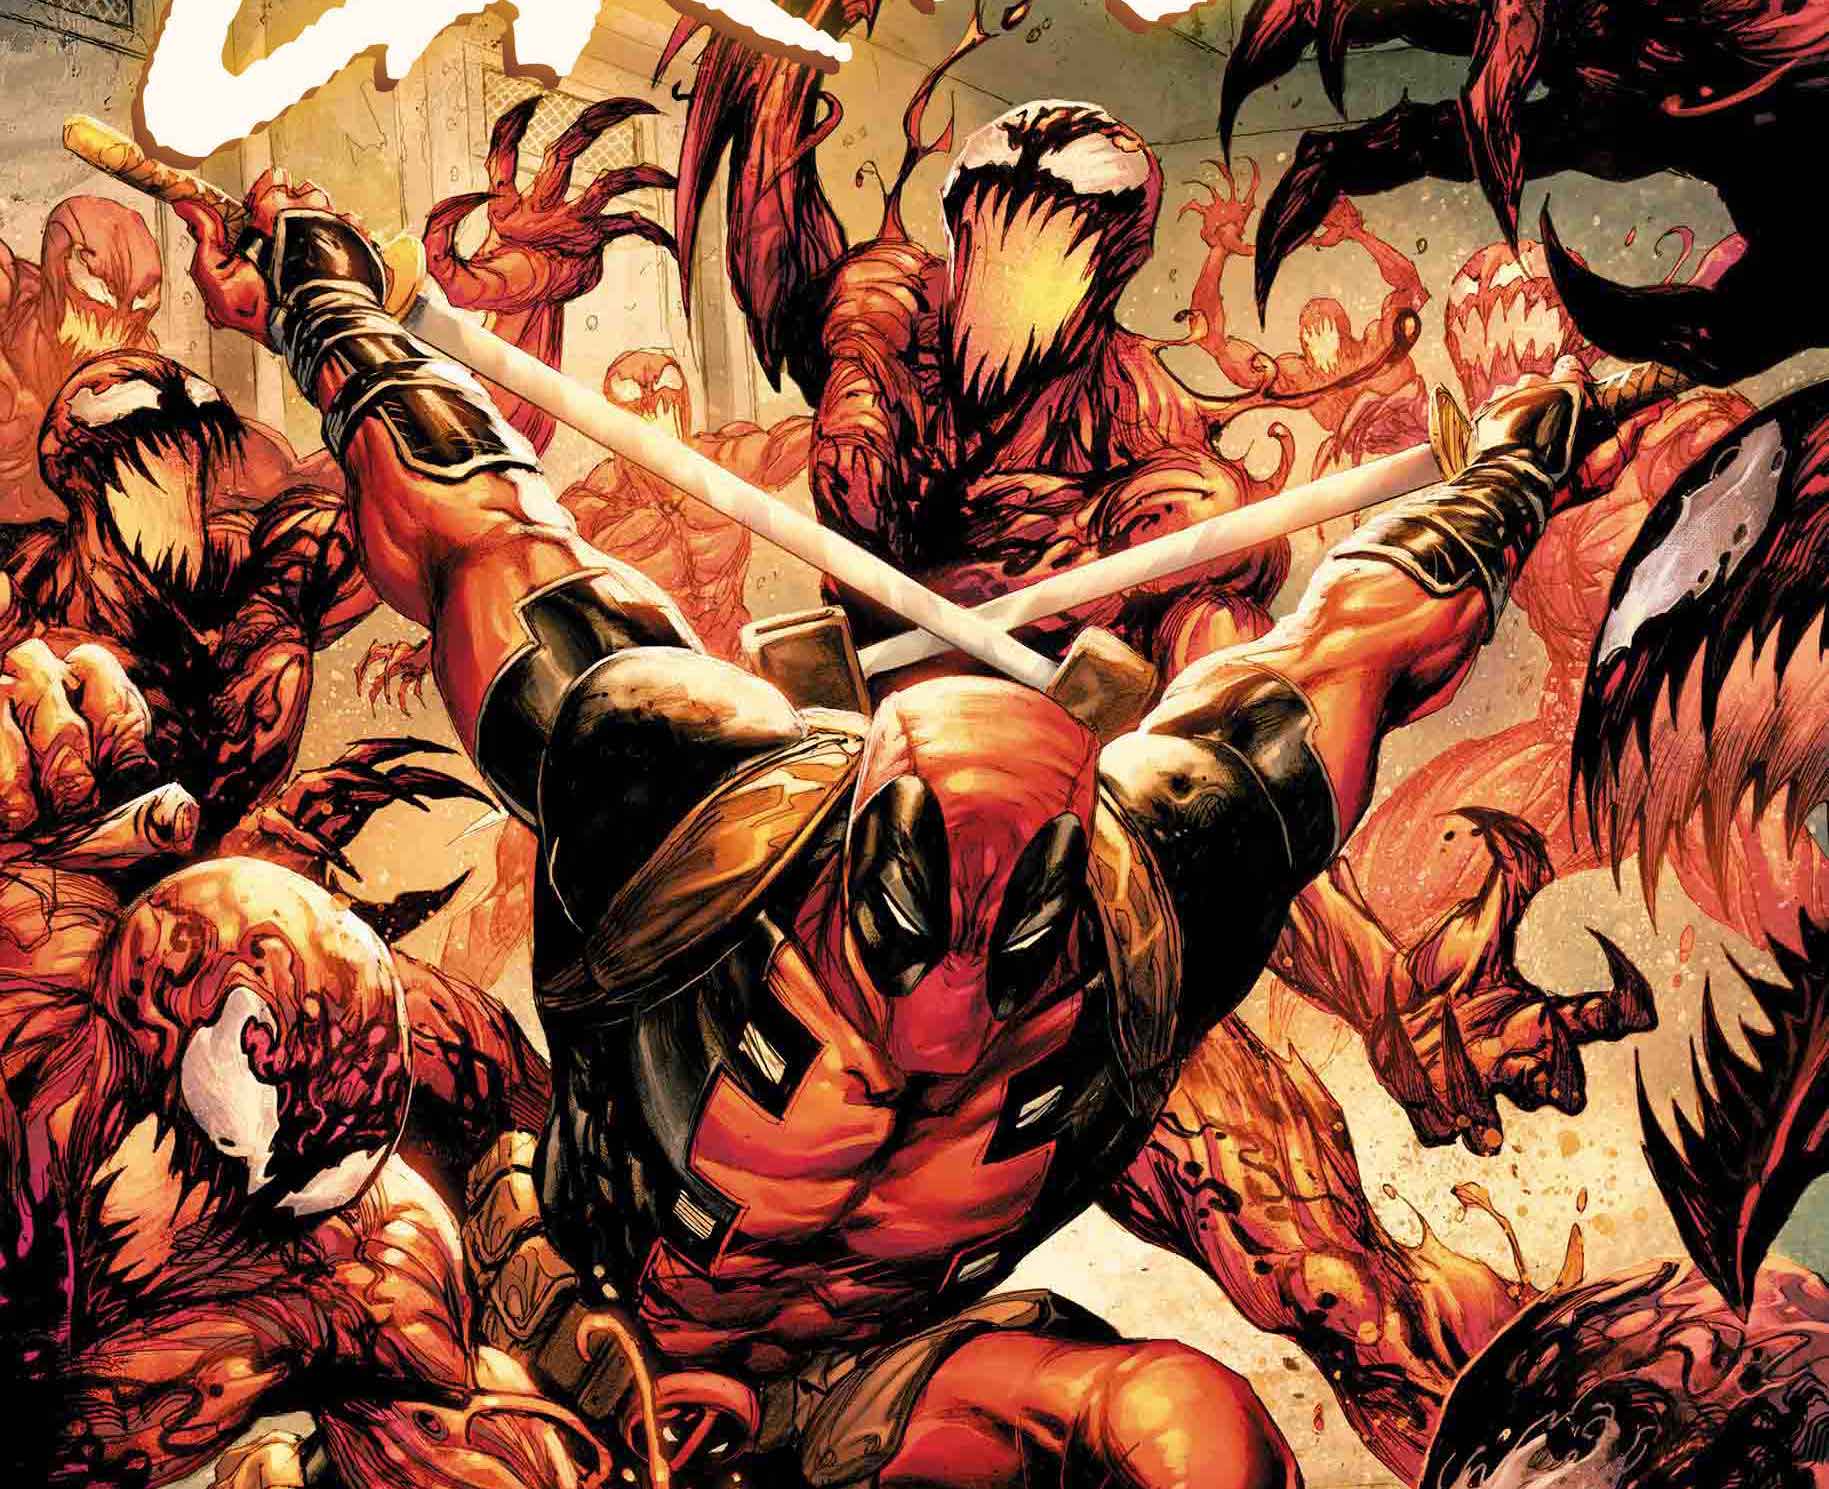 First Look: Every single Absolute Carnage tie-in revealed featuring Deadpool, new Symbiotes, and more!